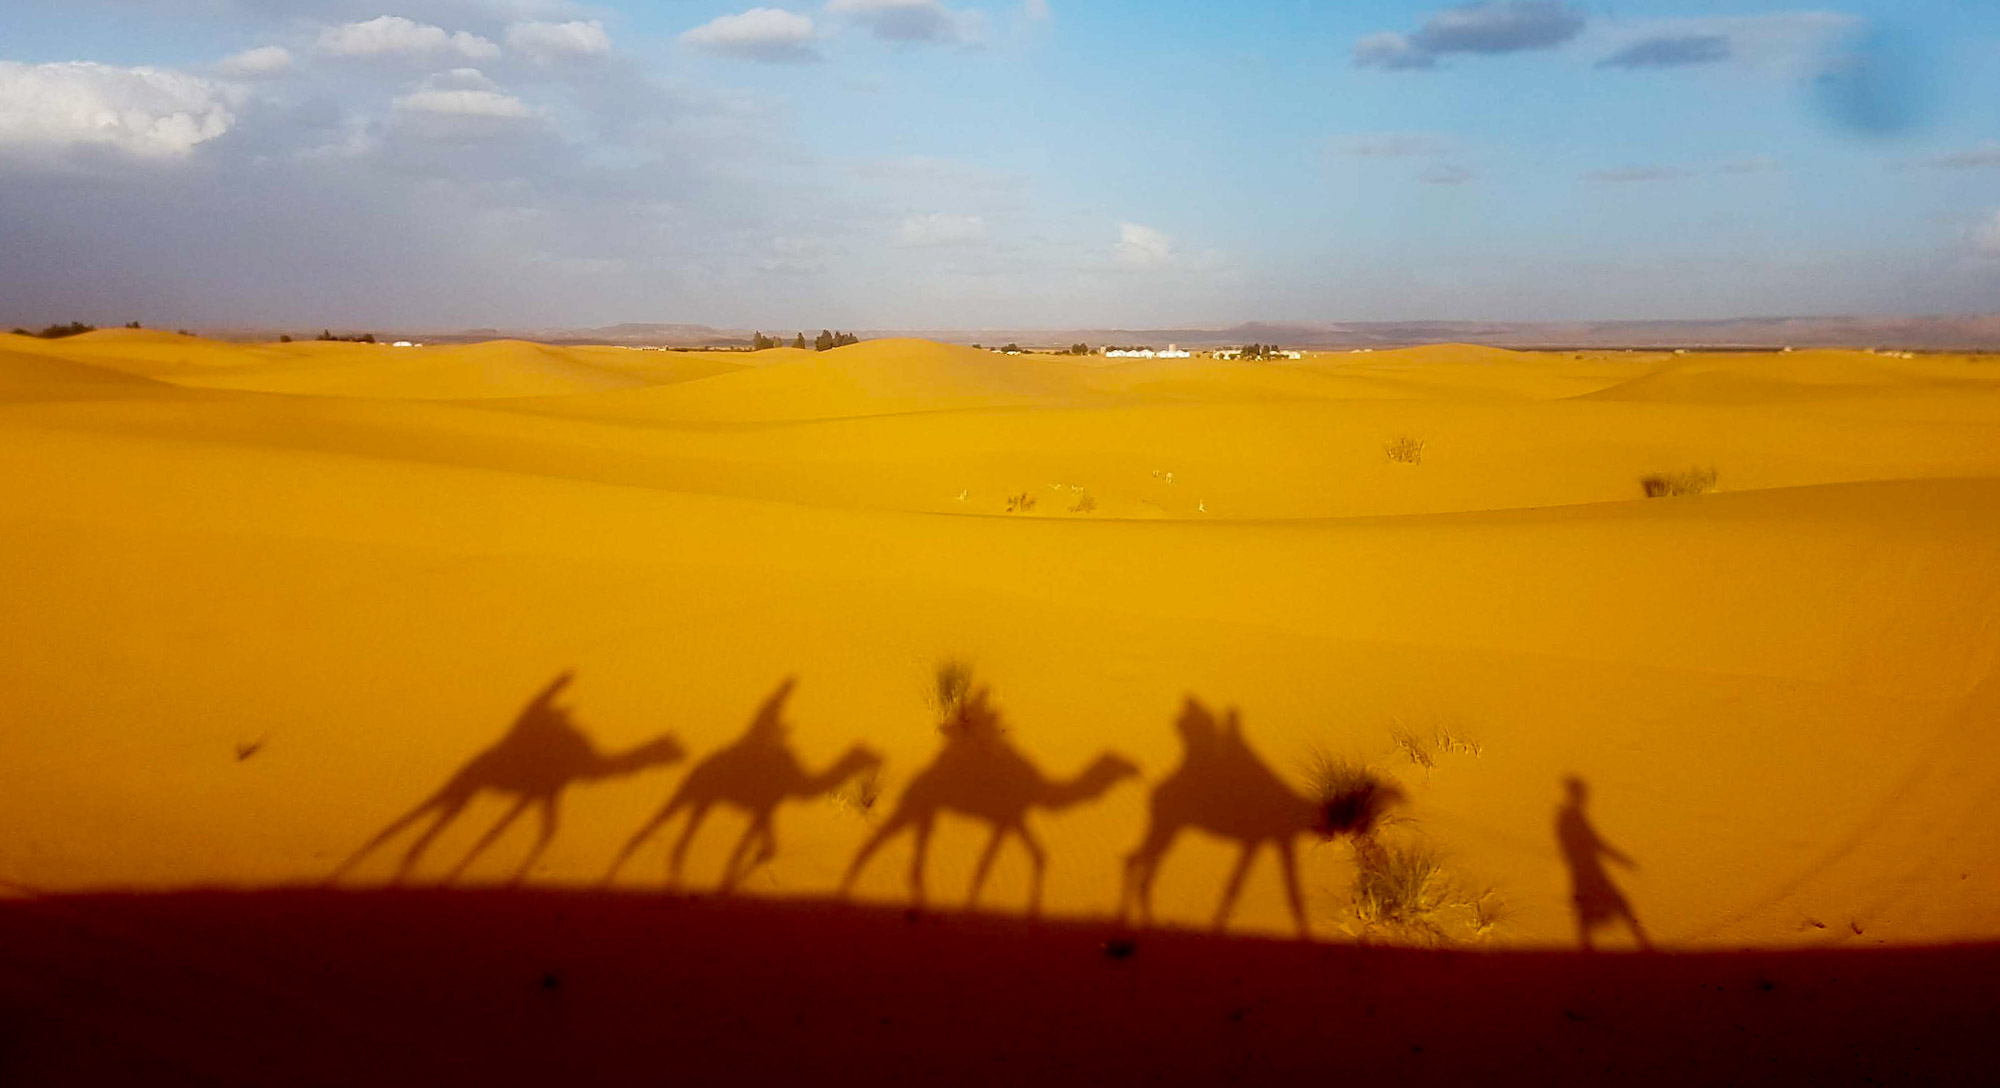 Shadow of a group riding camels in the desert at Merzouga, Morocco